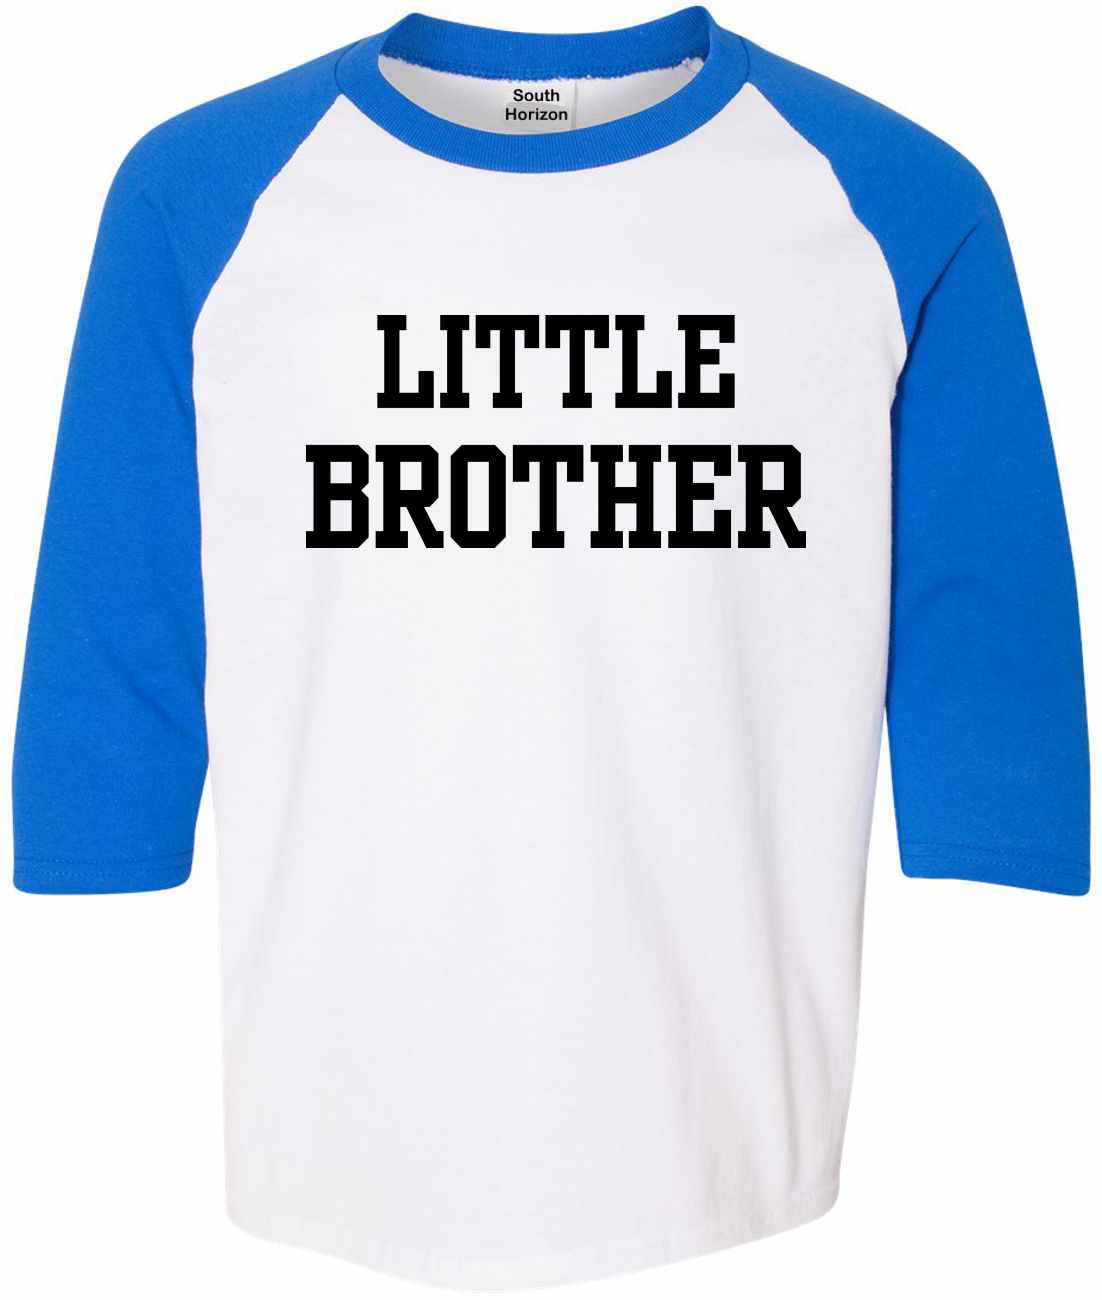 LITTLE BROTHER on Youth Baseball Shirt